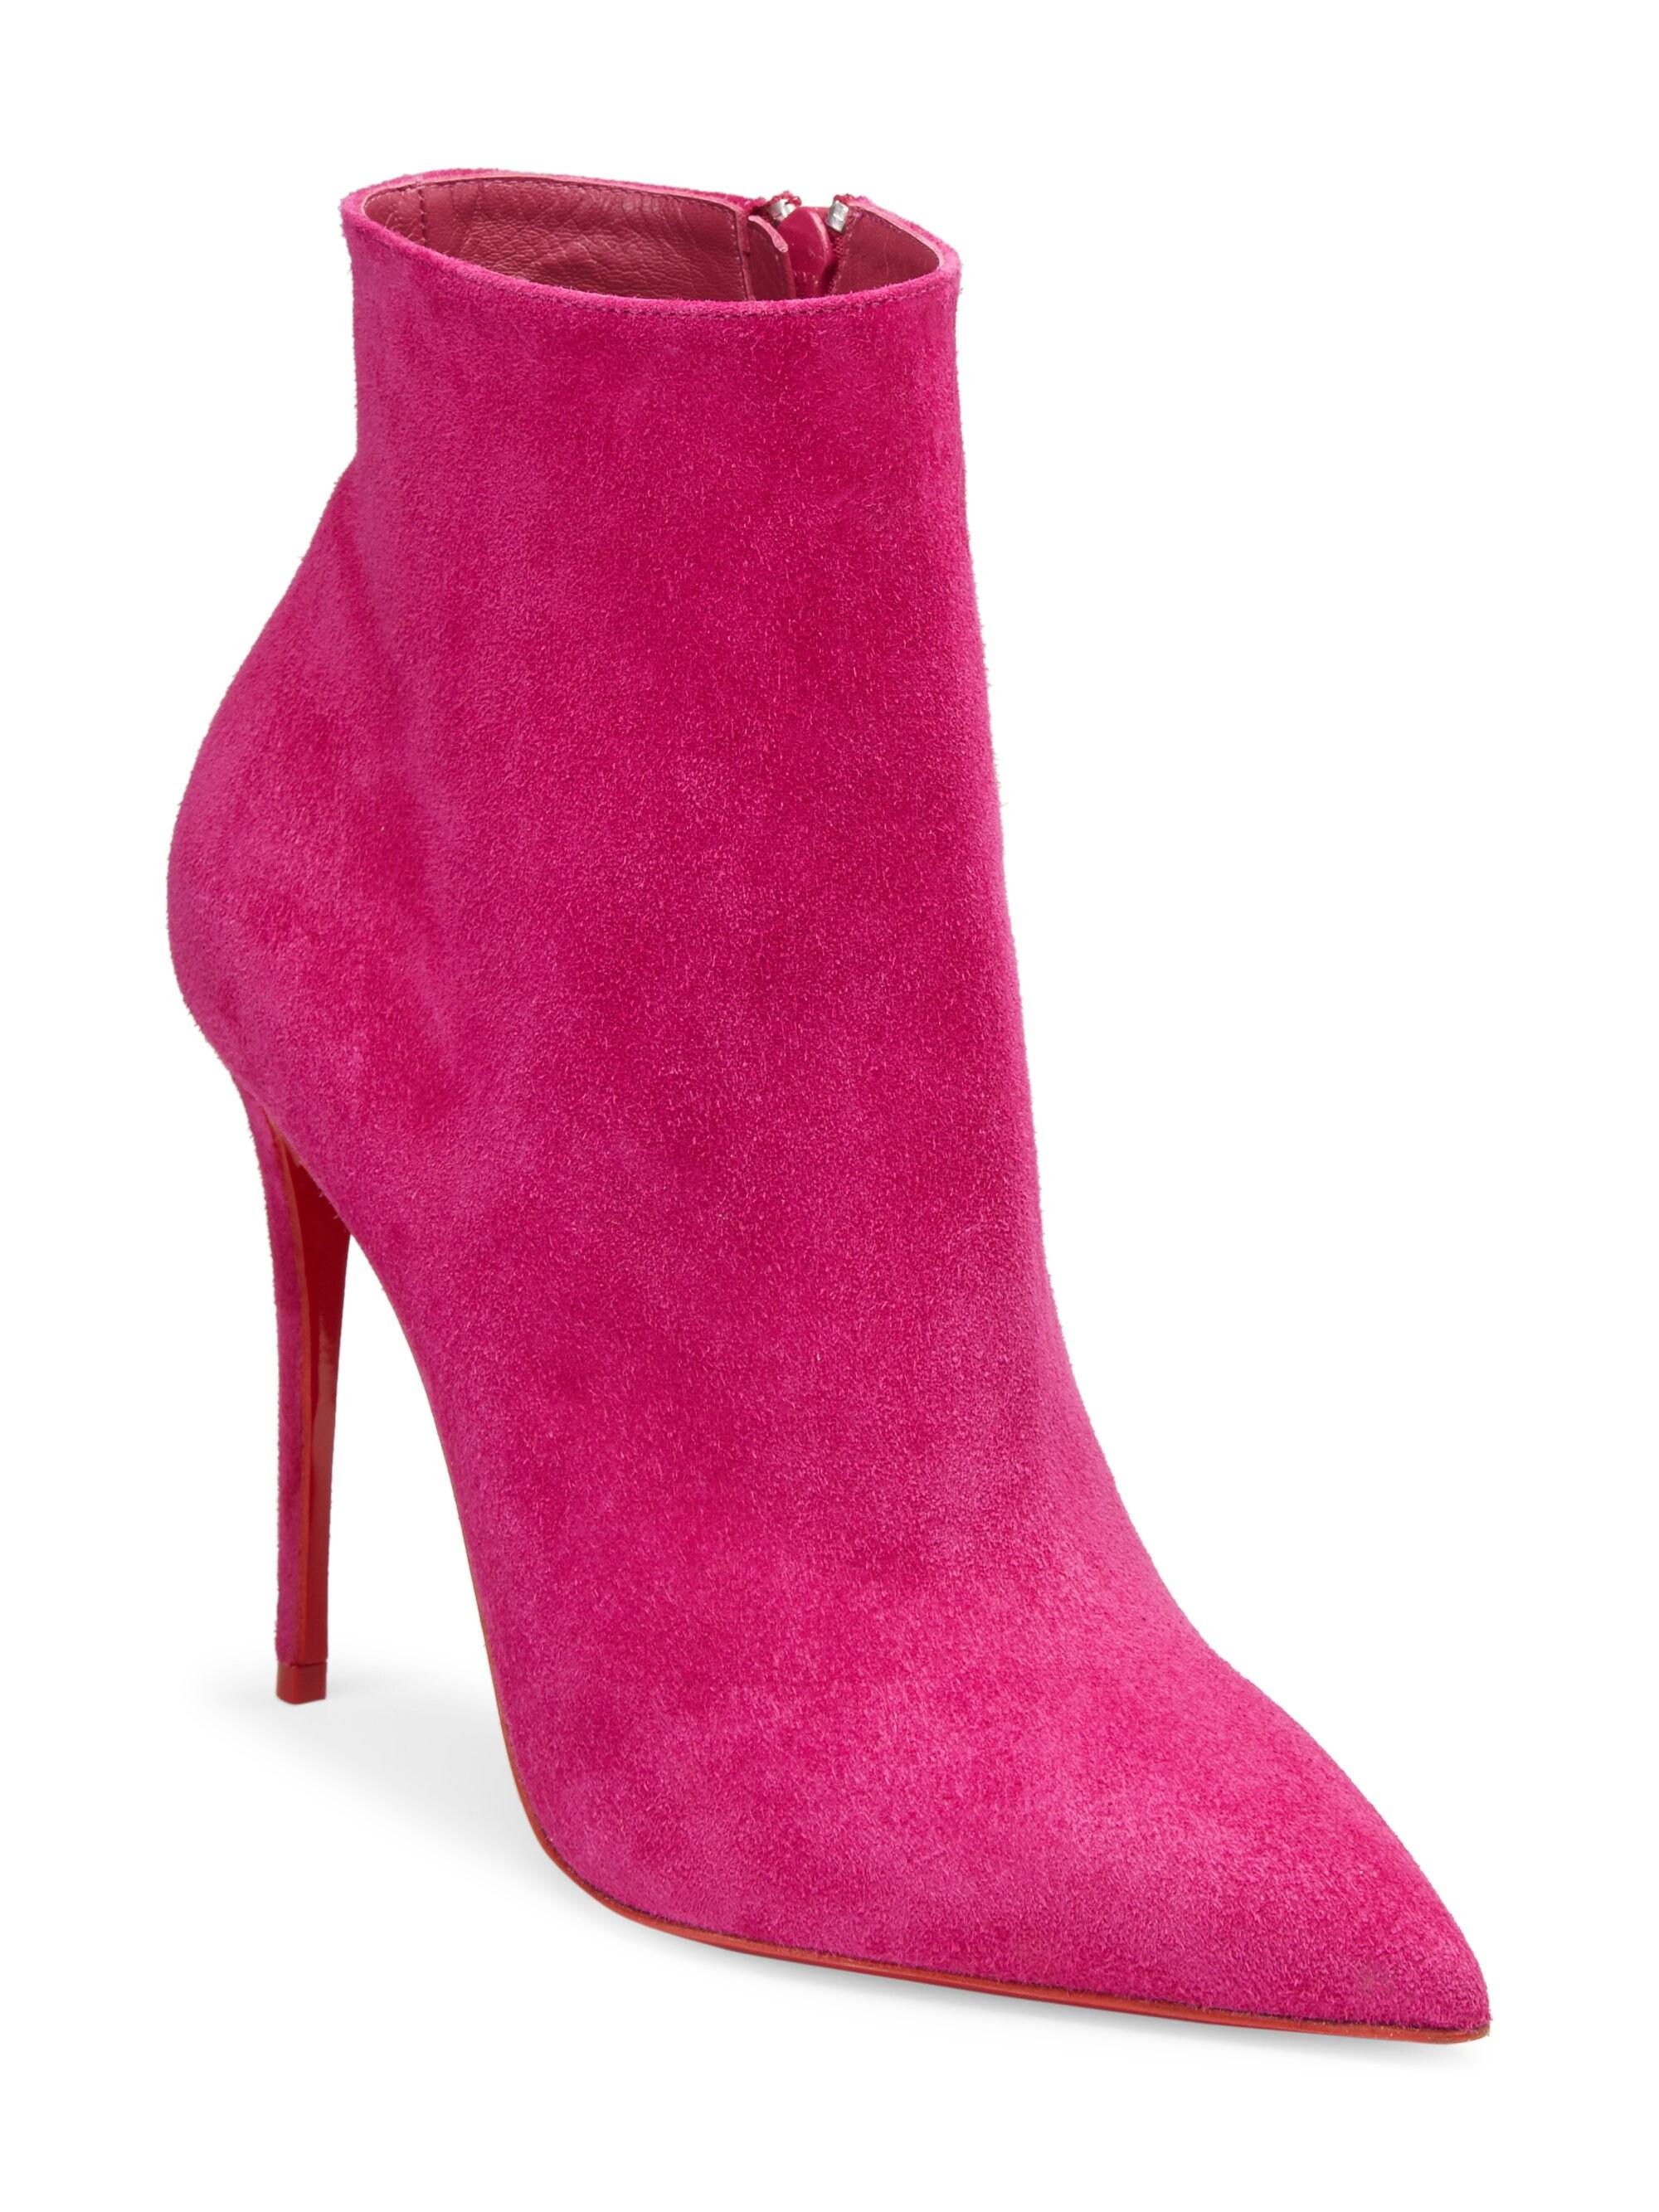 Christian Louboutin Women's So Kate 100 Suede Booties - Pink | Lyst